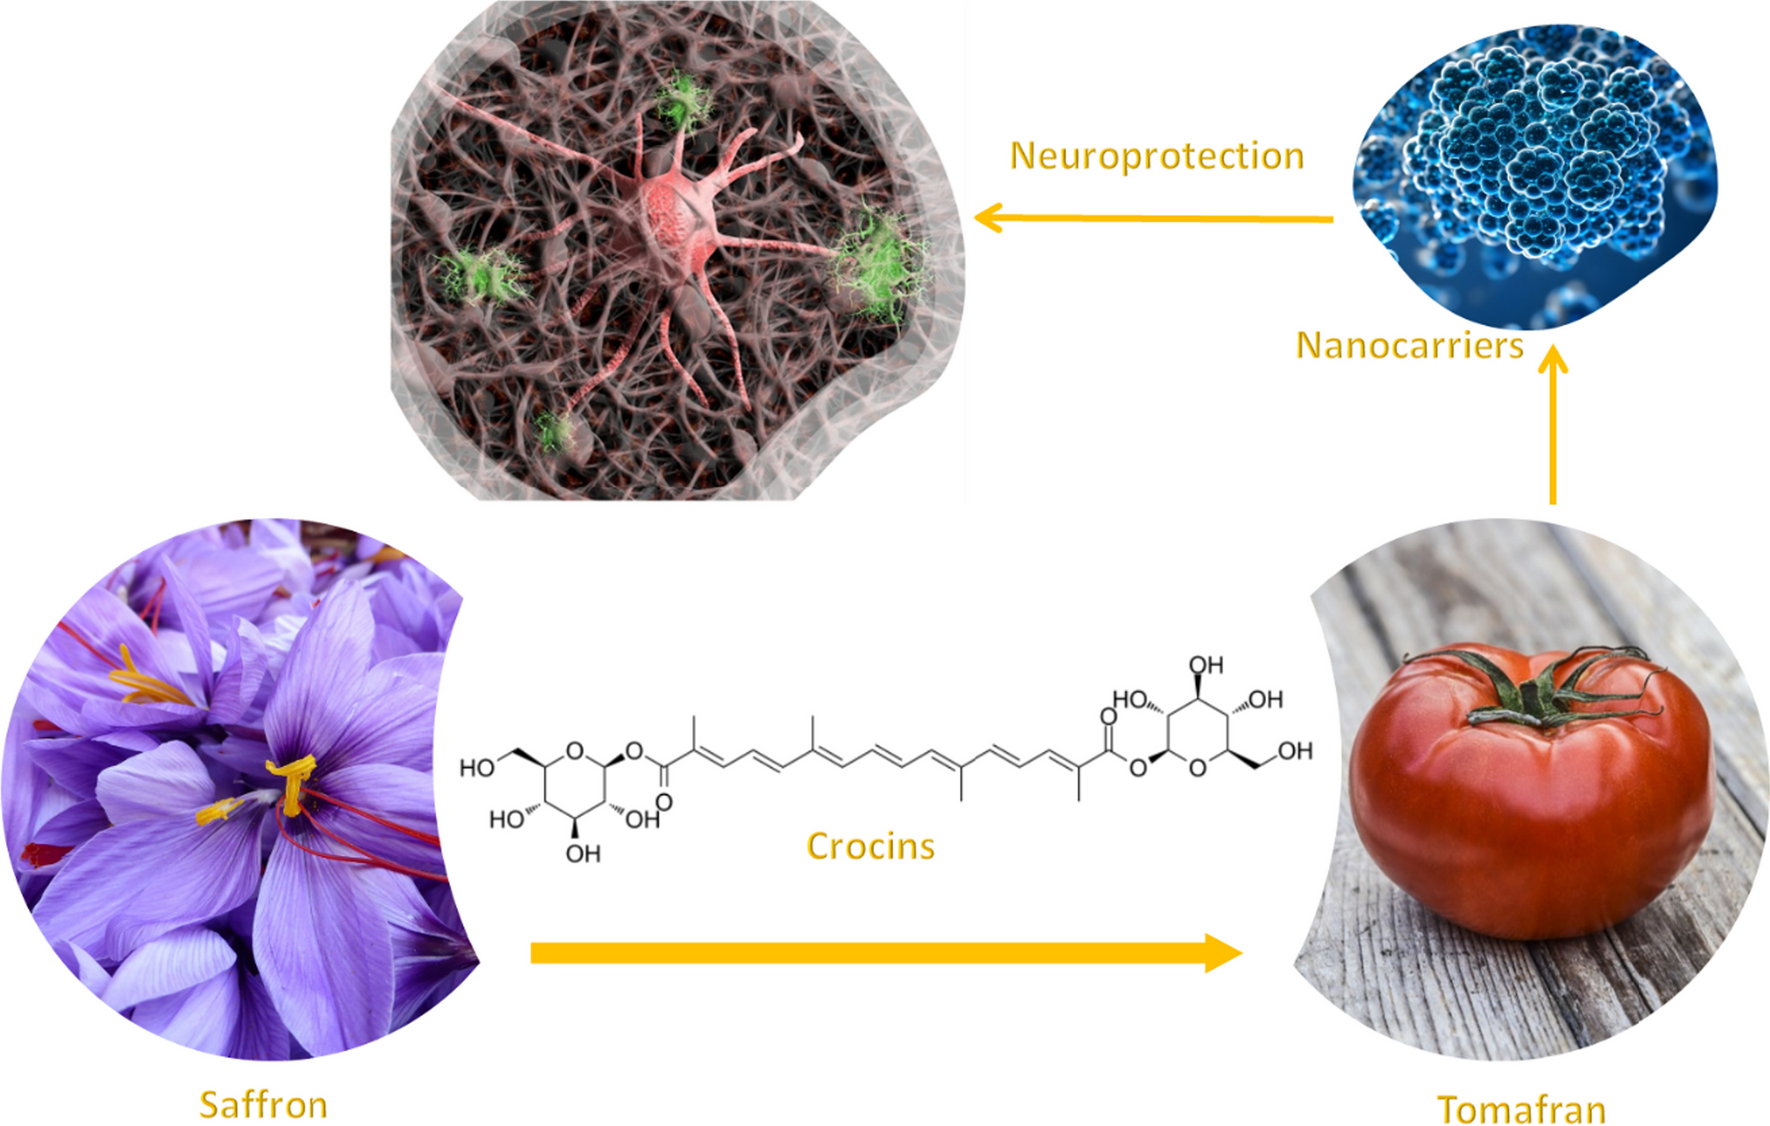 Neuroprotective properties of exosomes and chitosan nanoparticles of Tomafran, a bioengineered tomato enriched in crocins